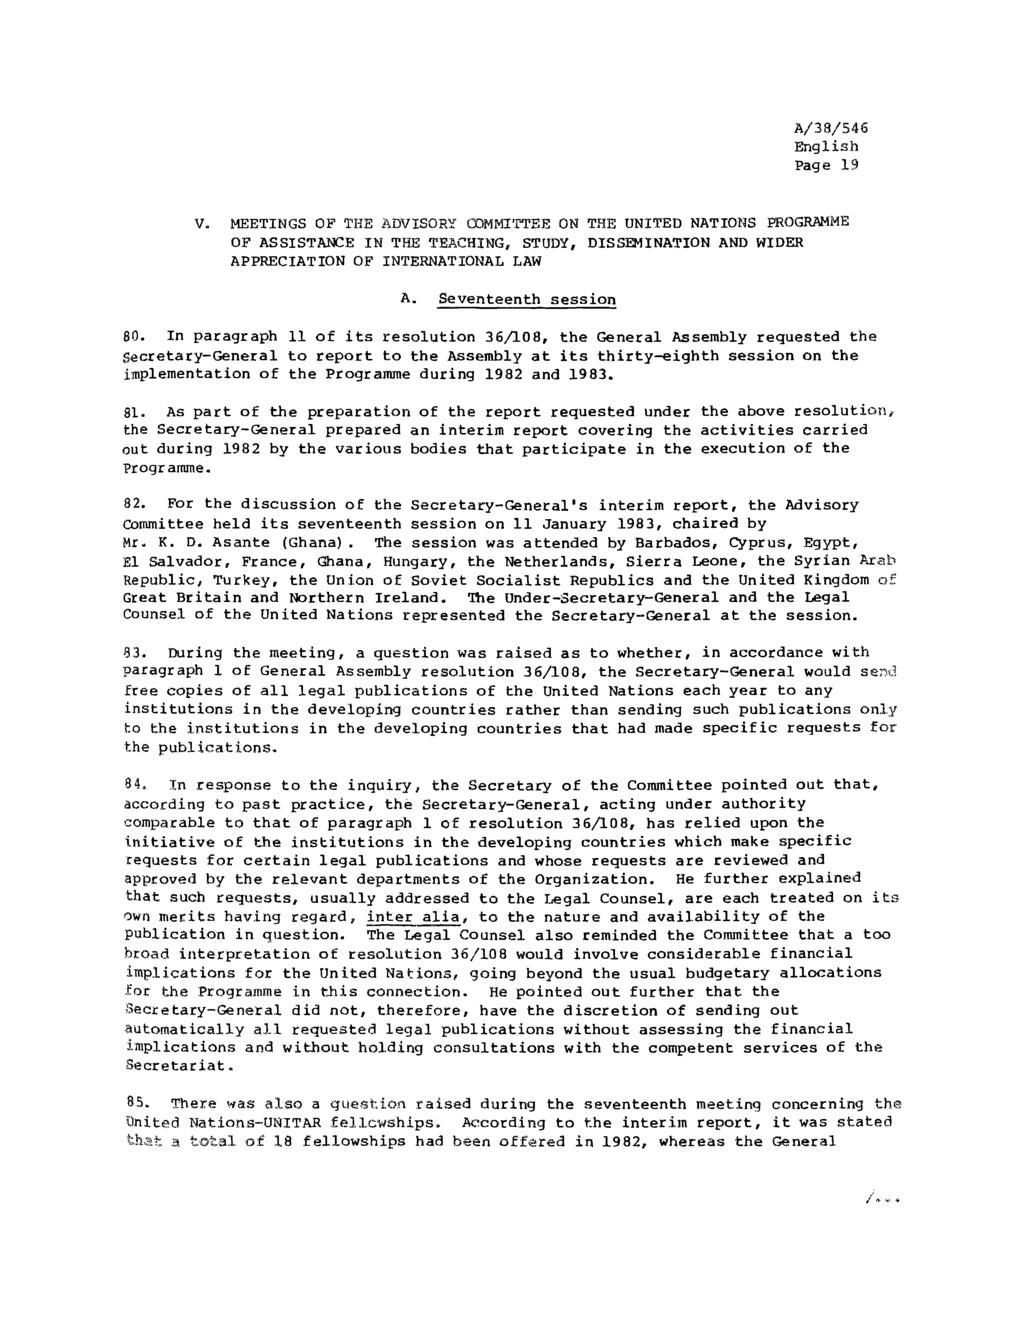 Page 19 V. MEETINGS OF THE ADVISORY COMMITTEE ON THE UNITED NATIONS PROGRAMME OF ASSISTANCE IN THE TEACHING, STUDY, DISSEMINATION AND WIDER APPRECIATION OF INTERNATIONAL LAW A. Seventeenth session 80.